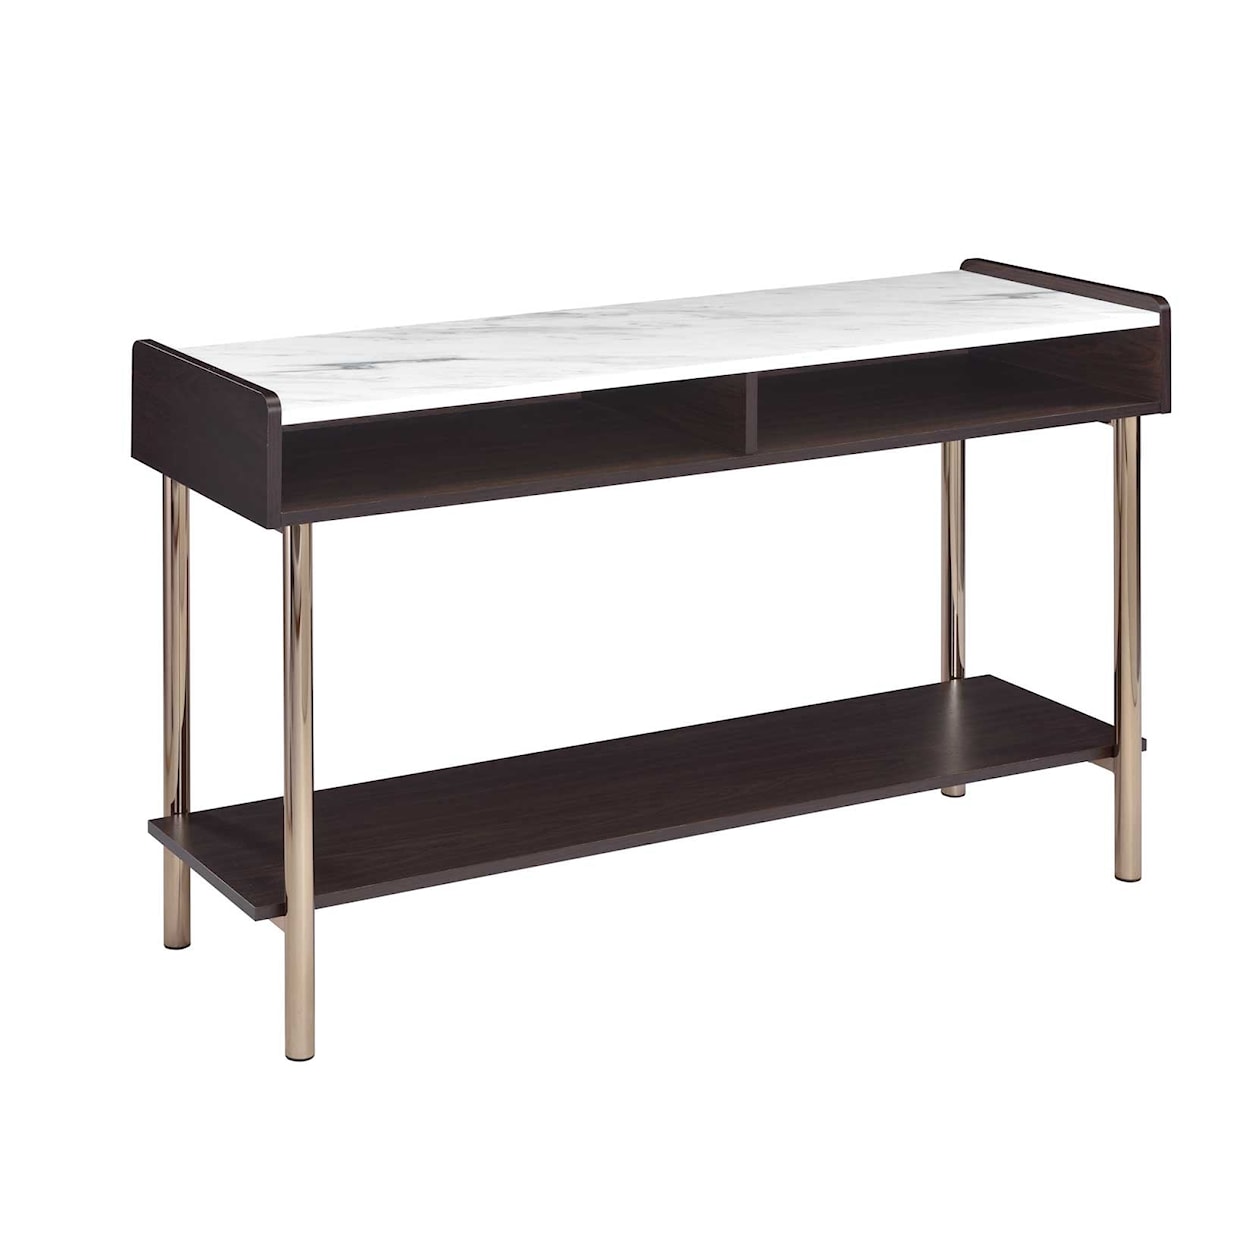 Steve Silver Carrie Sofa Table with Storage